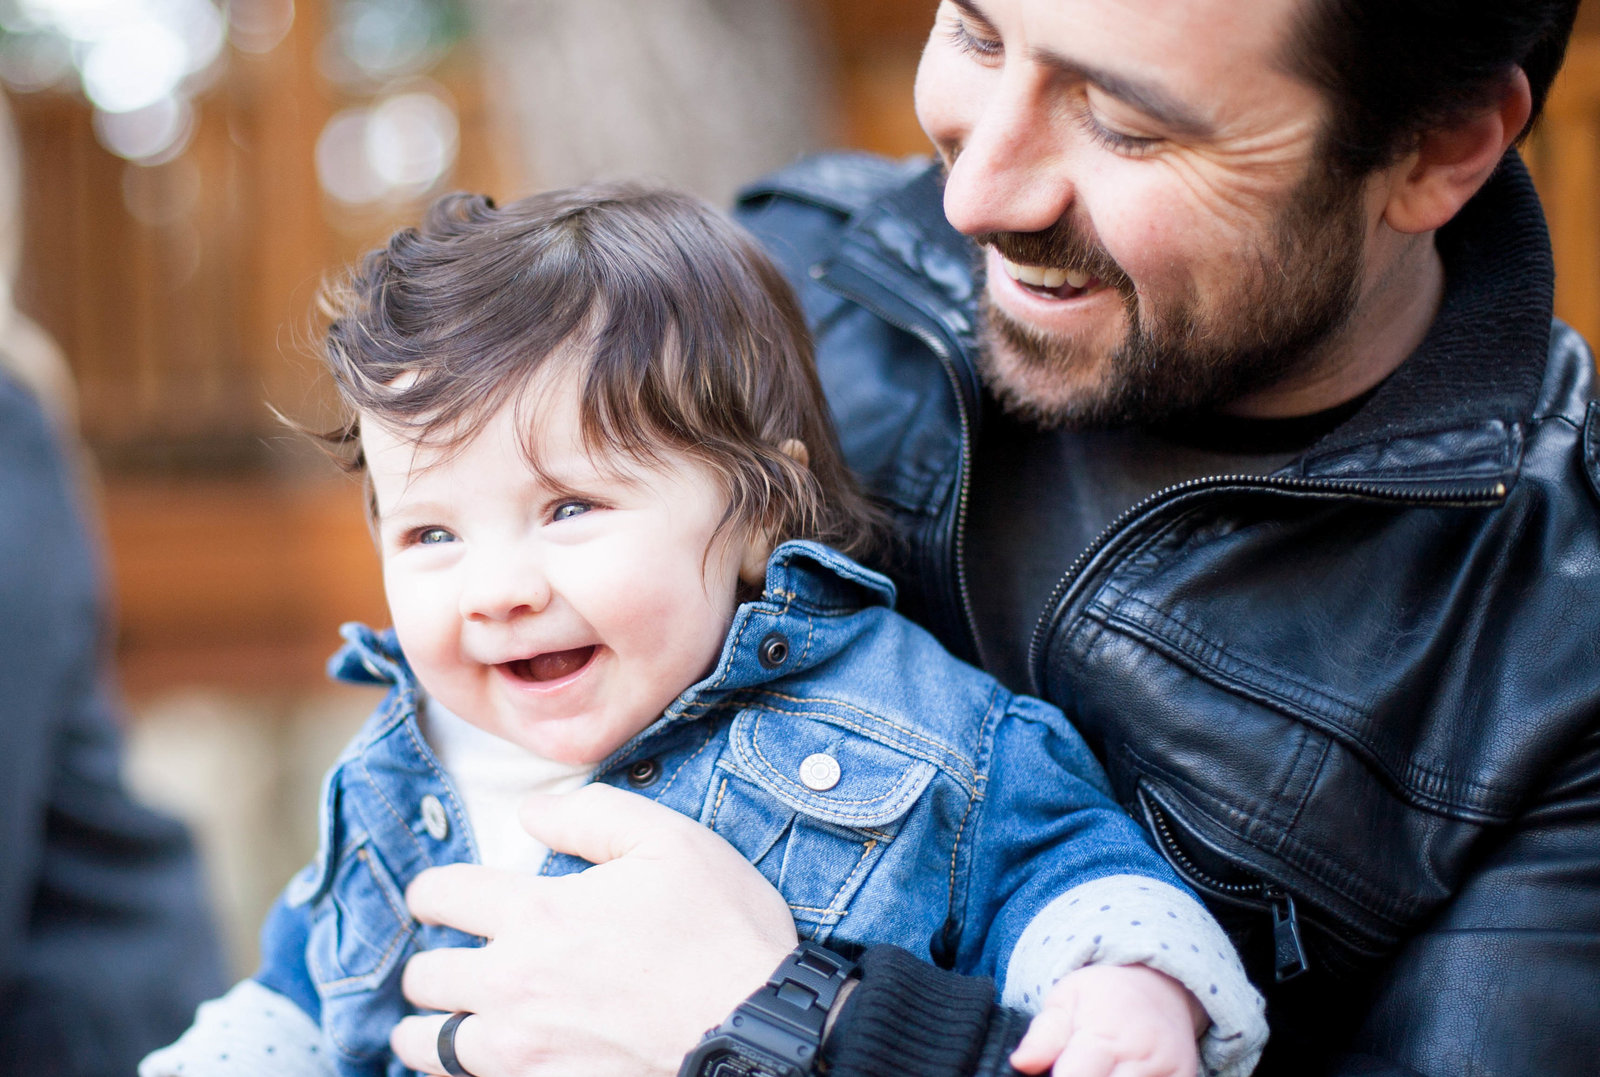 A father in a leather jacket holding his son, in a denim jacket.